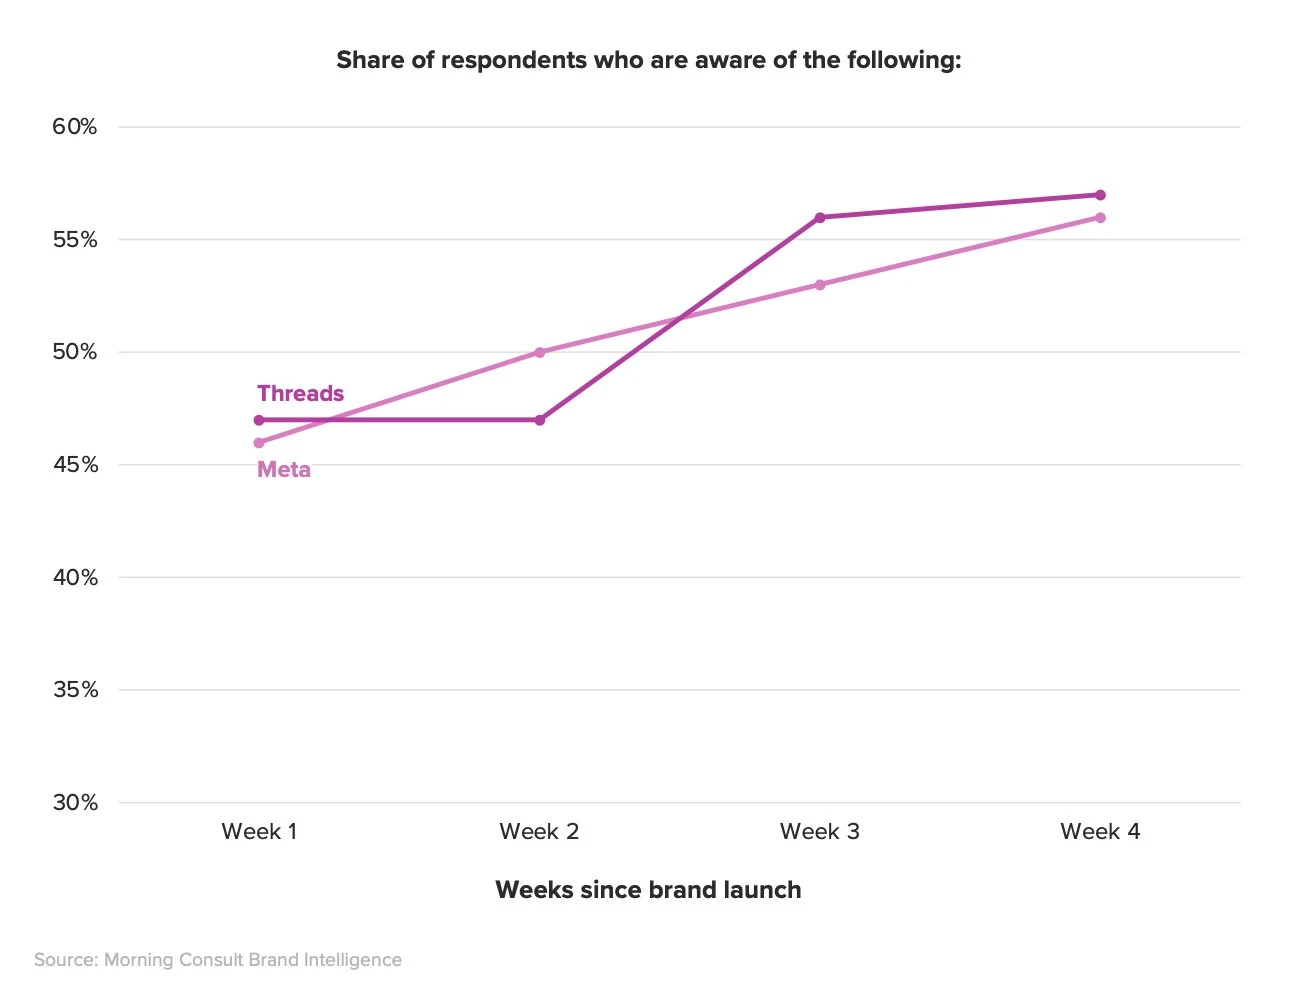 Threads’ brand familiarity growth is following a similar trajectory to Meta’s